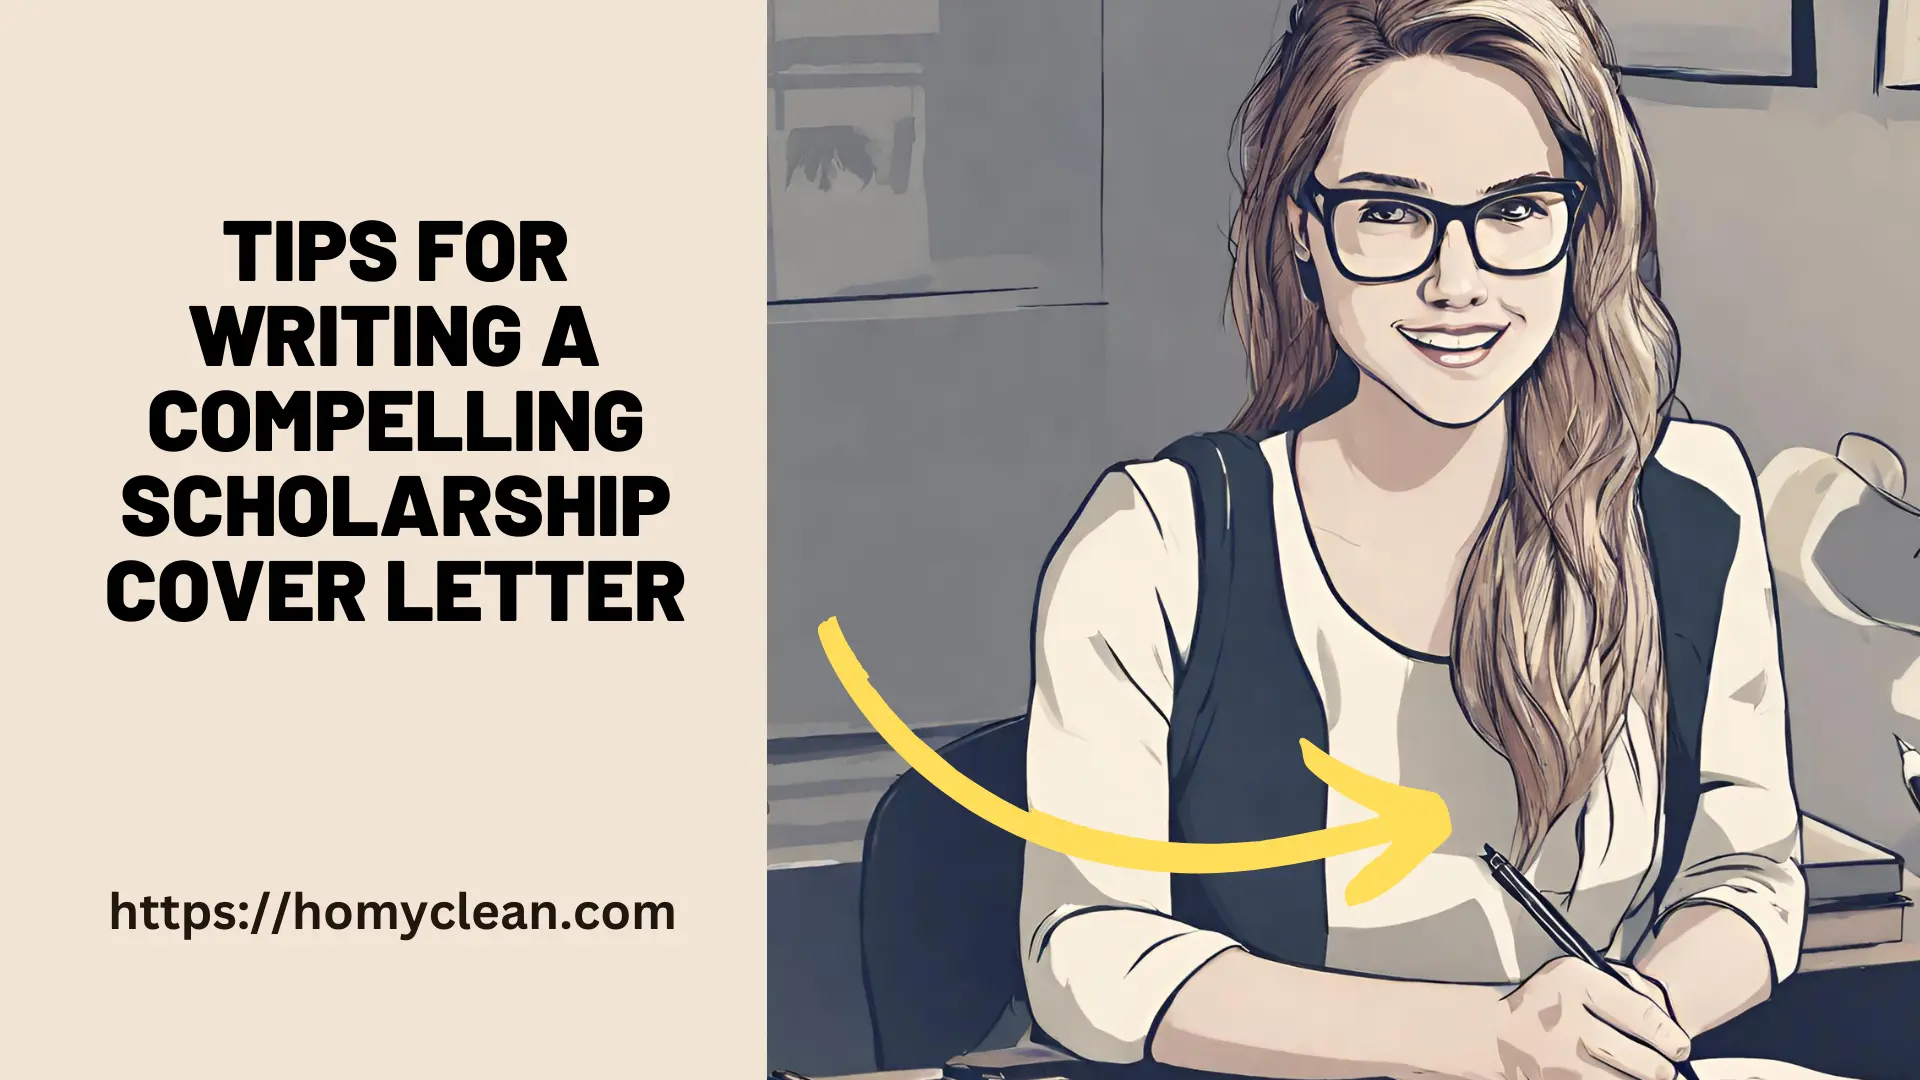 Tips for writing a compelling scholarship cover letter